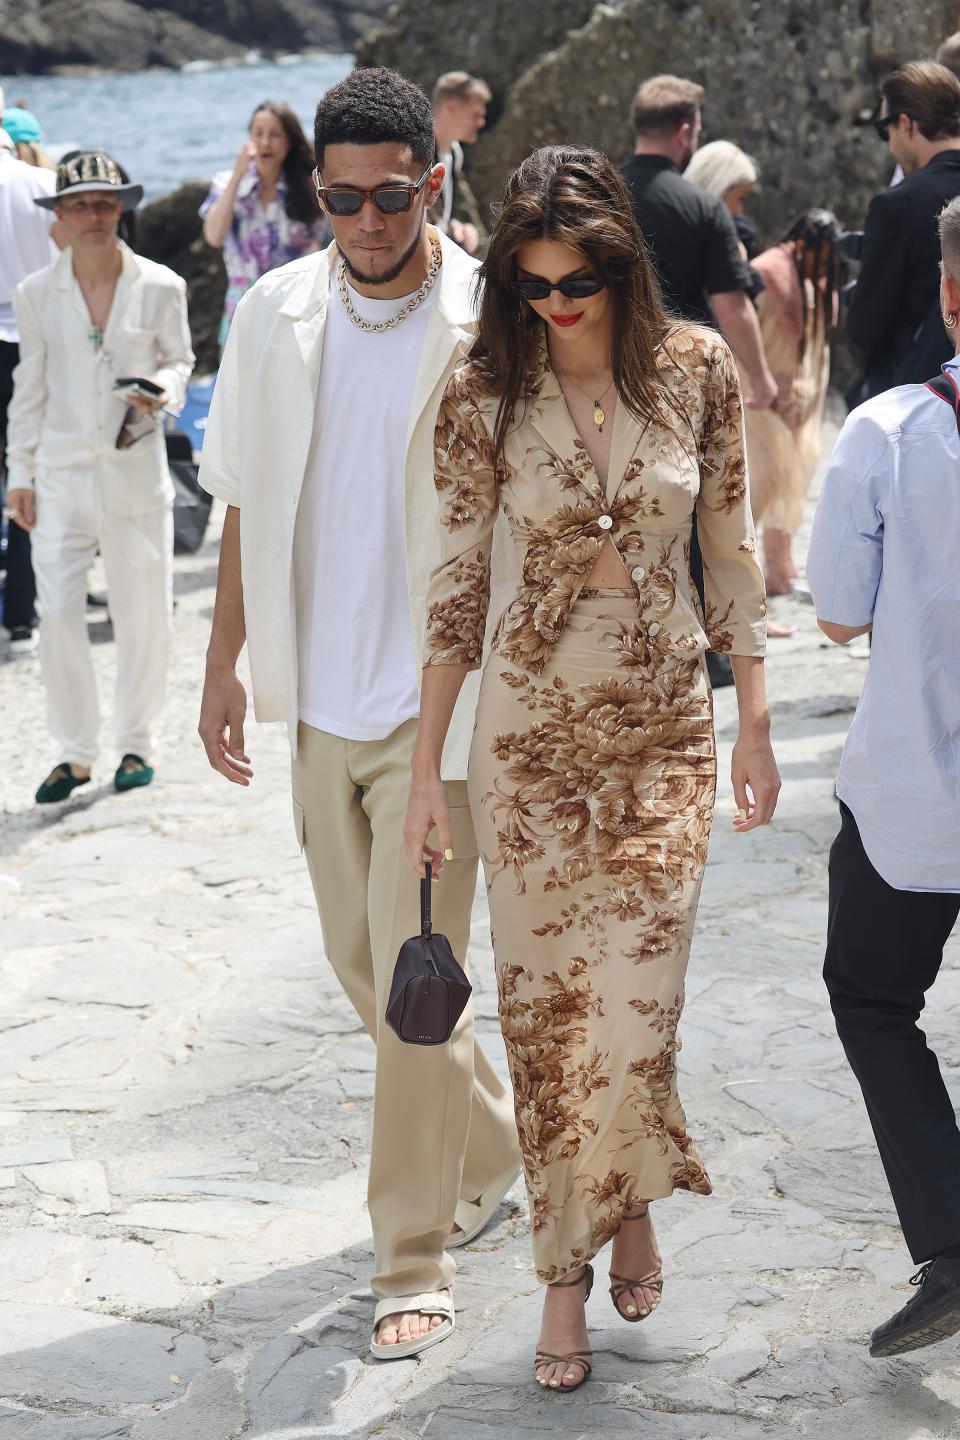 Kendall Jenner and Devin Booker arriving for lunch at the Abbey of San Fruttuoso on May 21, 2022.